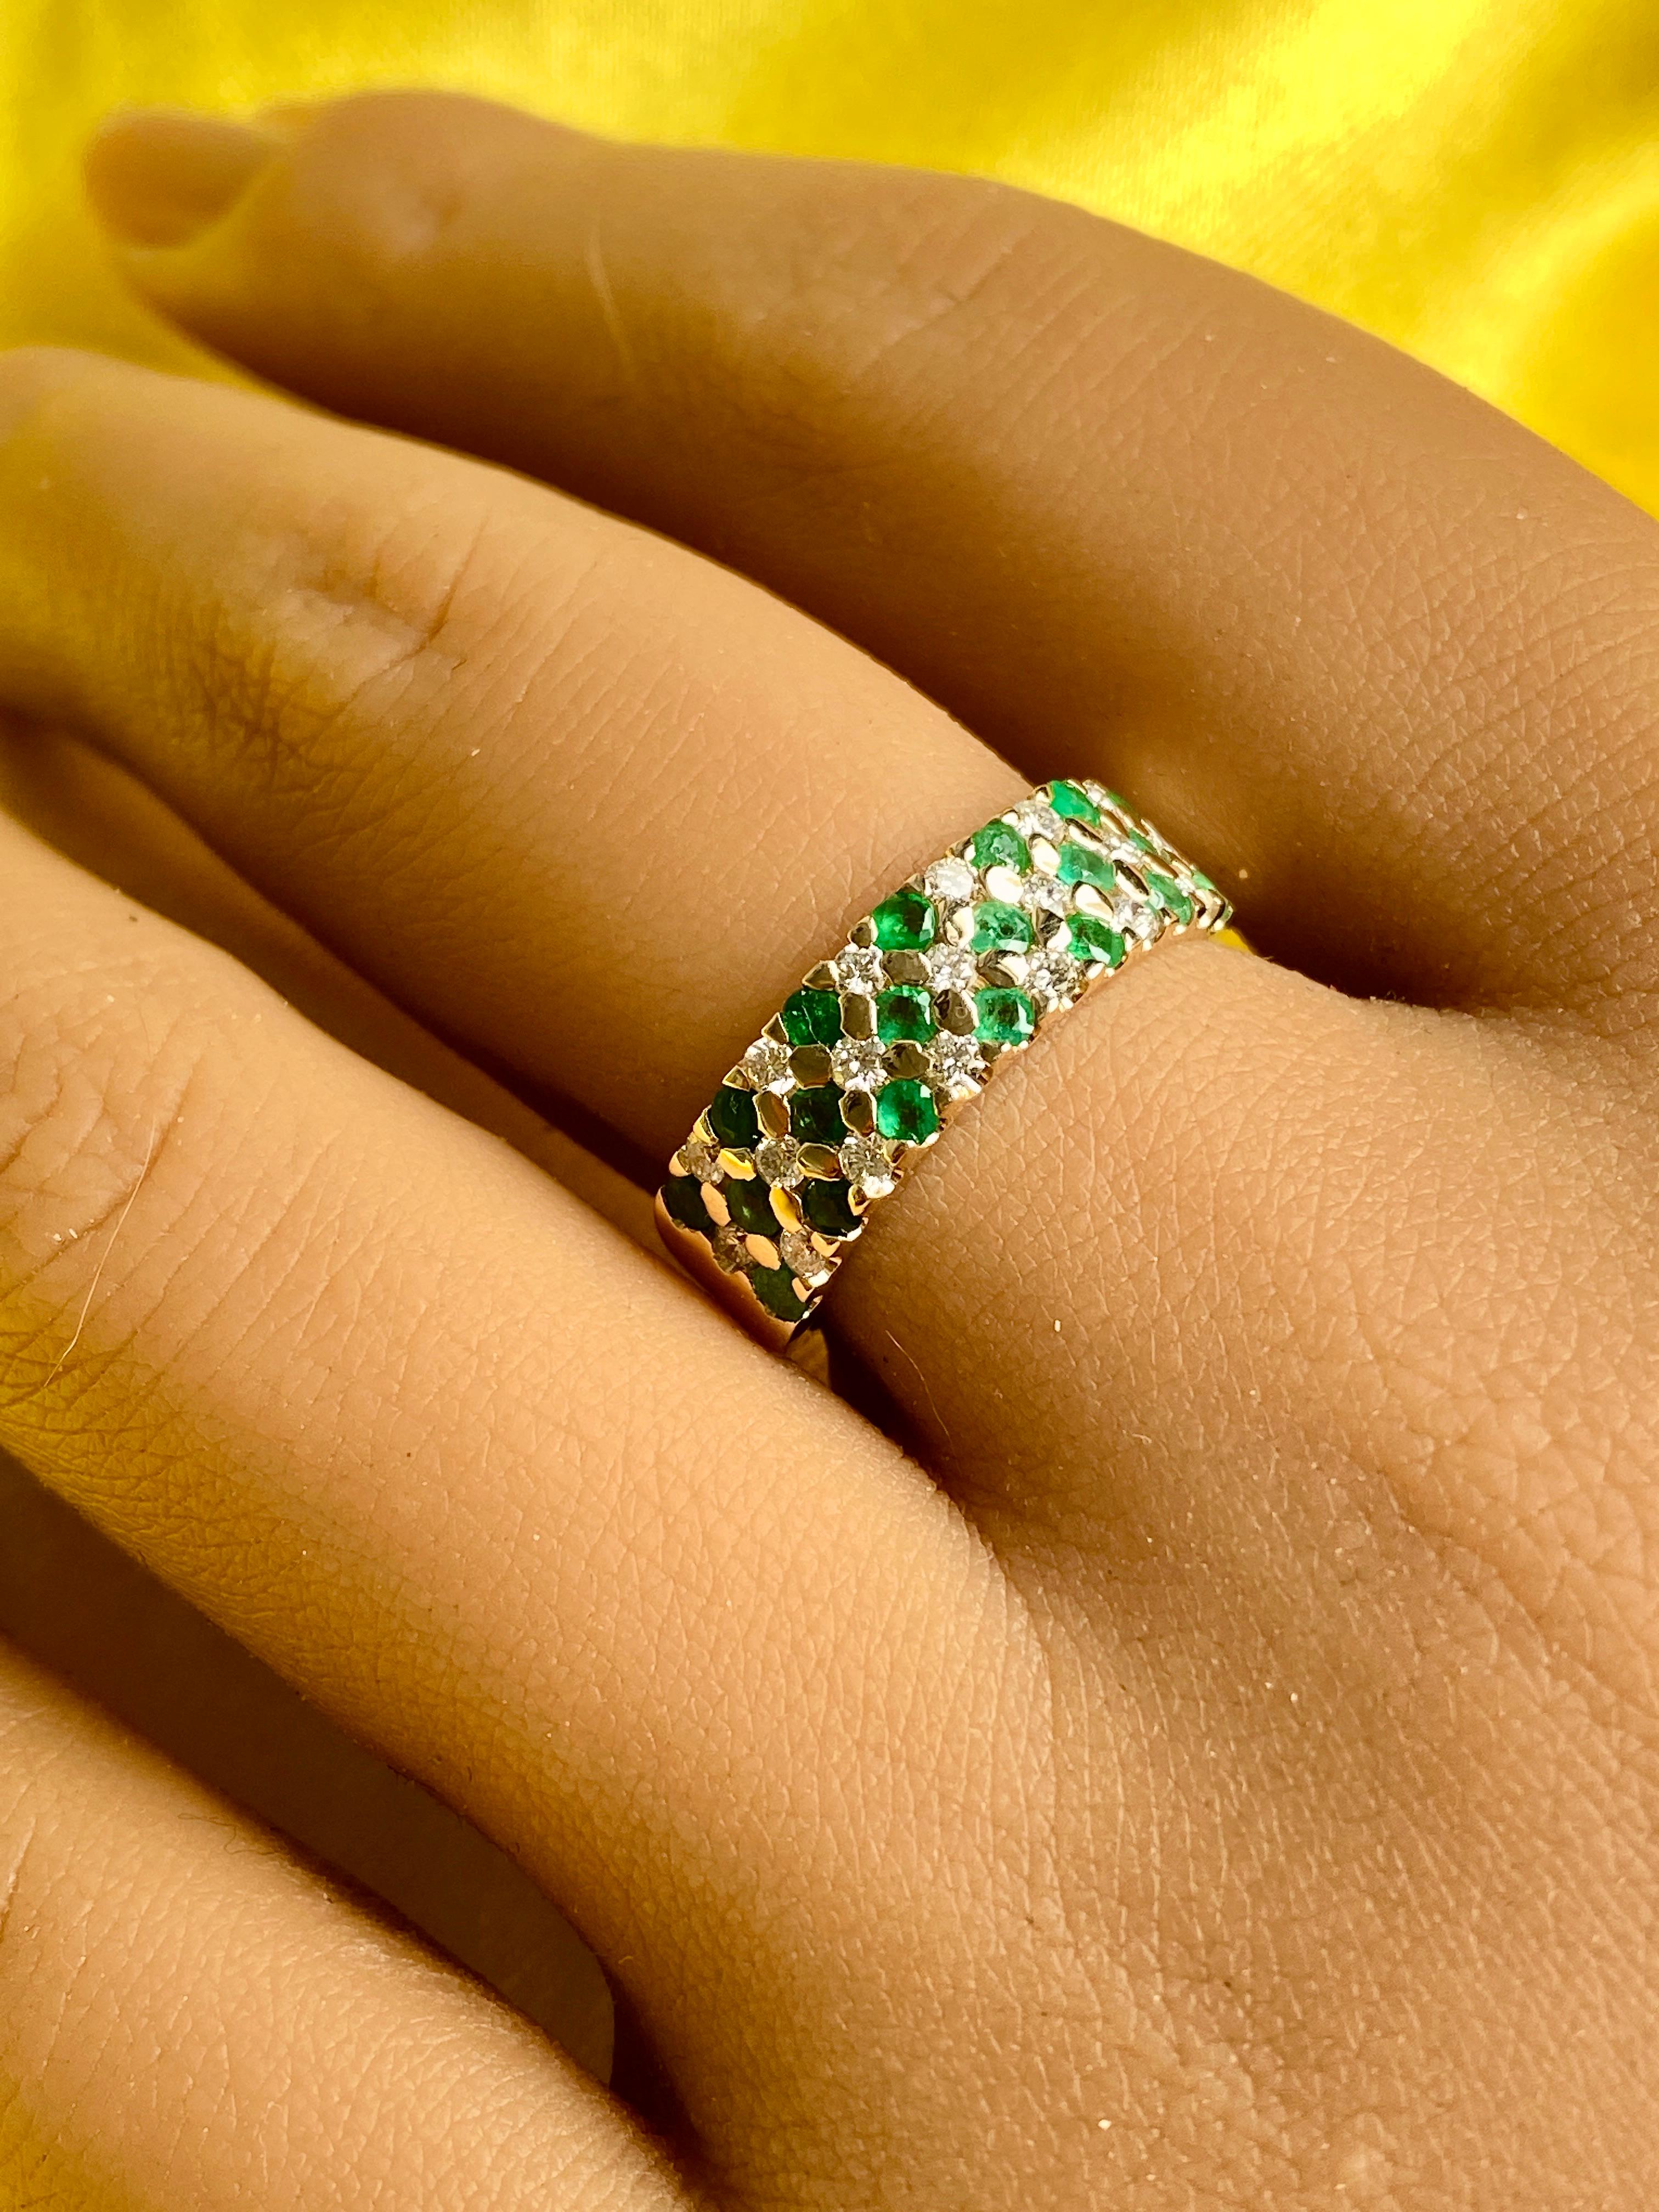 14k solid gold Emerald and Diamond band

This ring is crafted in 14k solid gold with Genuine Green Emeralds and VS quality Diamonds. The unique design and setting of this ring steals the show!
A perfect band to stack rings with, or can even be a